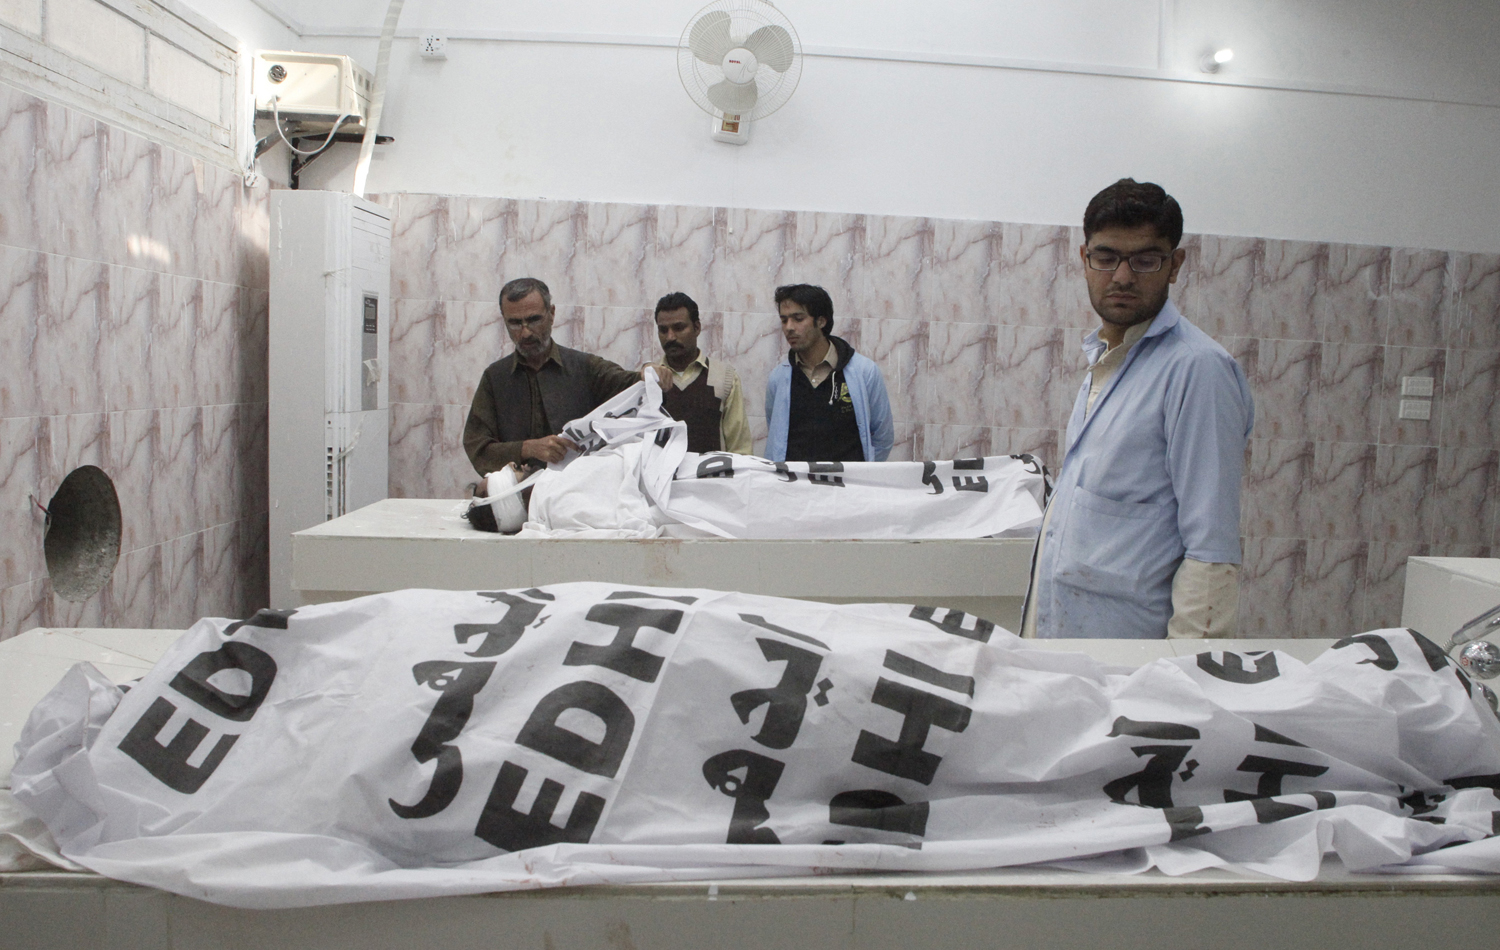 Hospital staff stand near the bodies of antipolio campaign workers who were shot by gunmen, at a hospital morgue in Quetta, Pakistan, on Nov. 26, 2014 (Naseer Ahmed—Reuters)